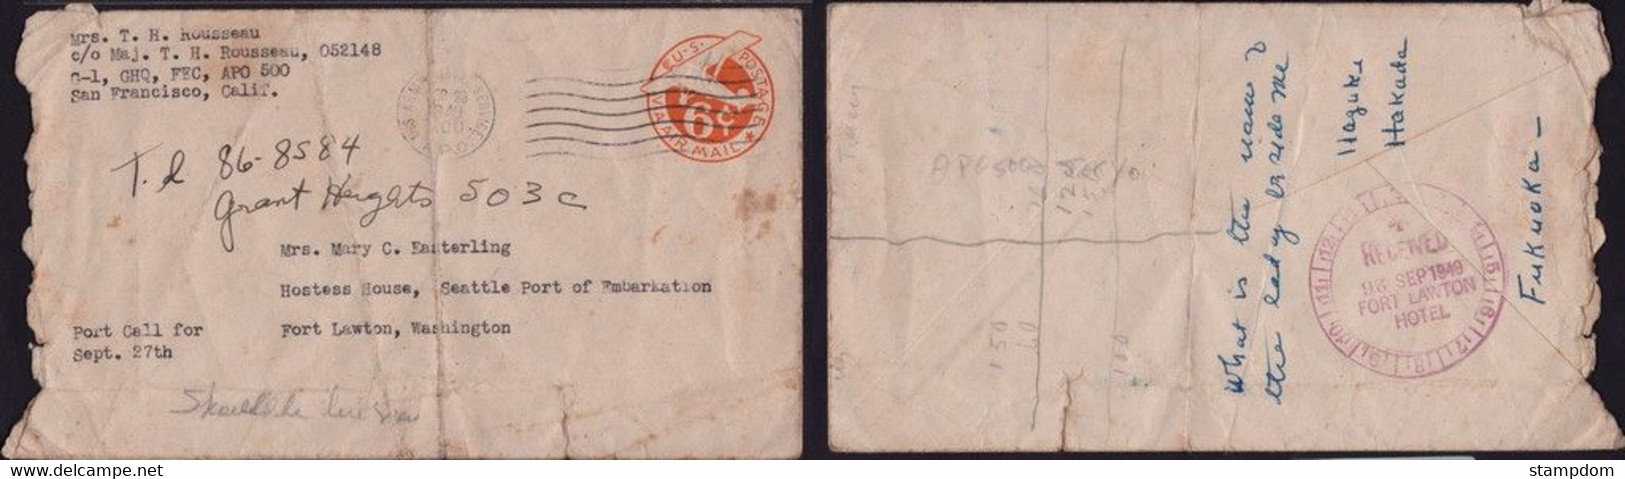 USA 1949 6c Air Mail PSE - USED @D3628 - 1941-60